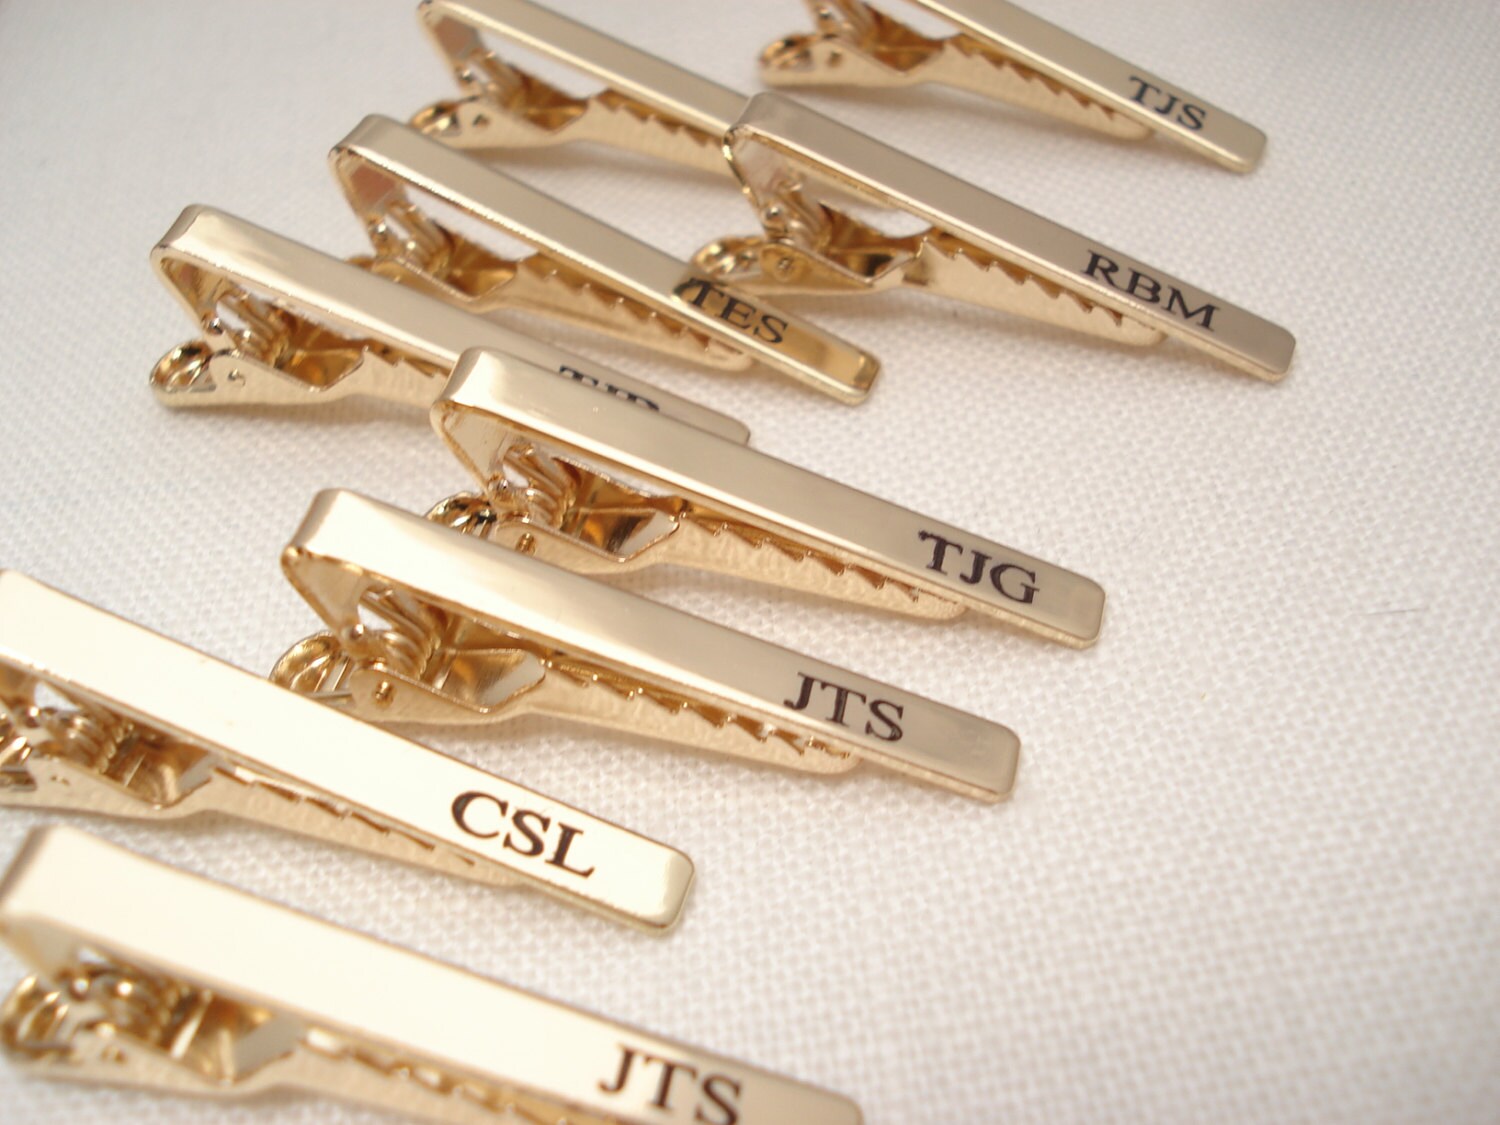 SET of tie pins in yellow gold, including : - a tie pi…